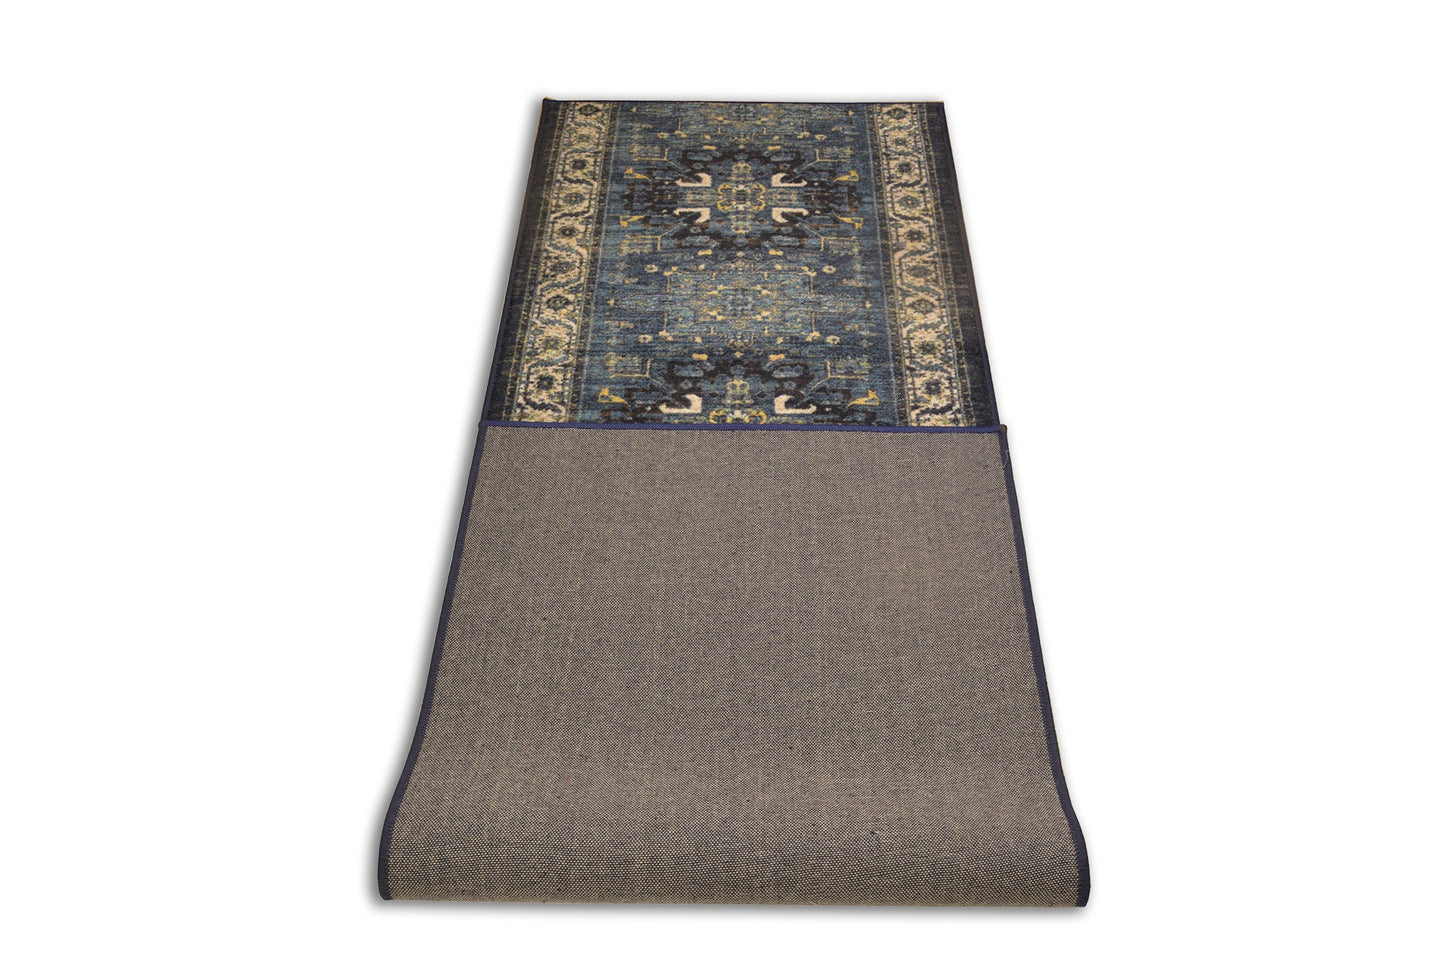 Custom Size Runner Rug Antique Persian Medallion Navy Blue Natural Cotton Backing Pick Your Own Size By Up to 50 Ft, Width 26" or 35"